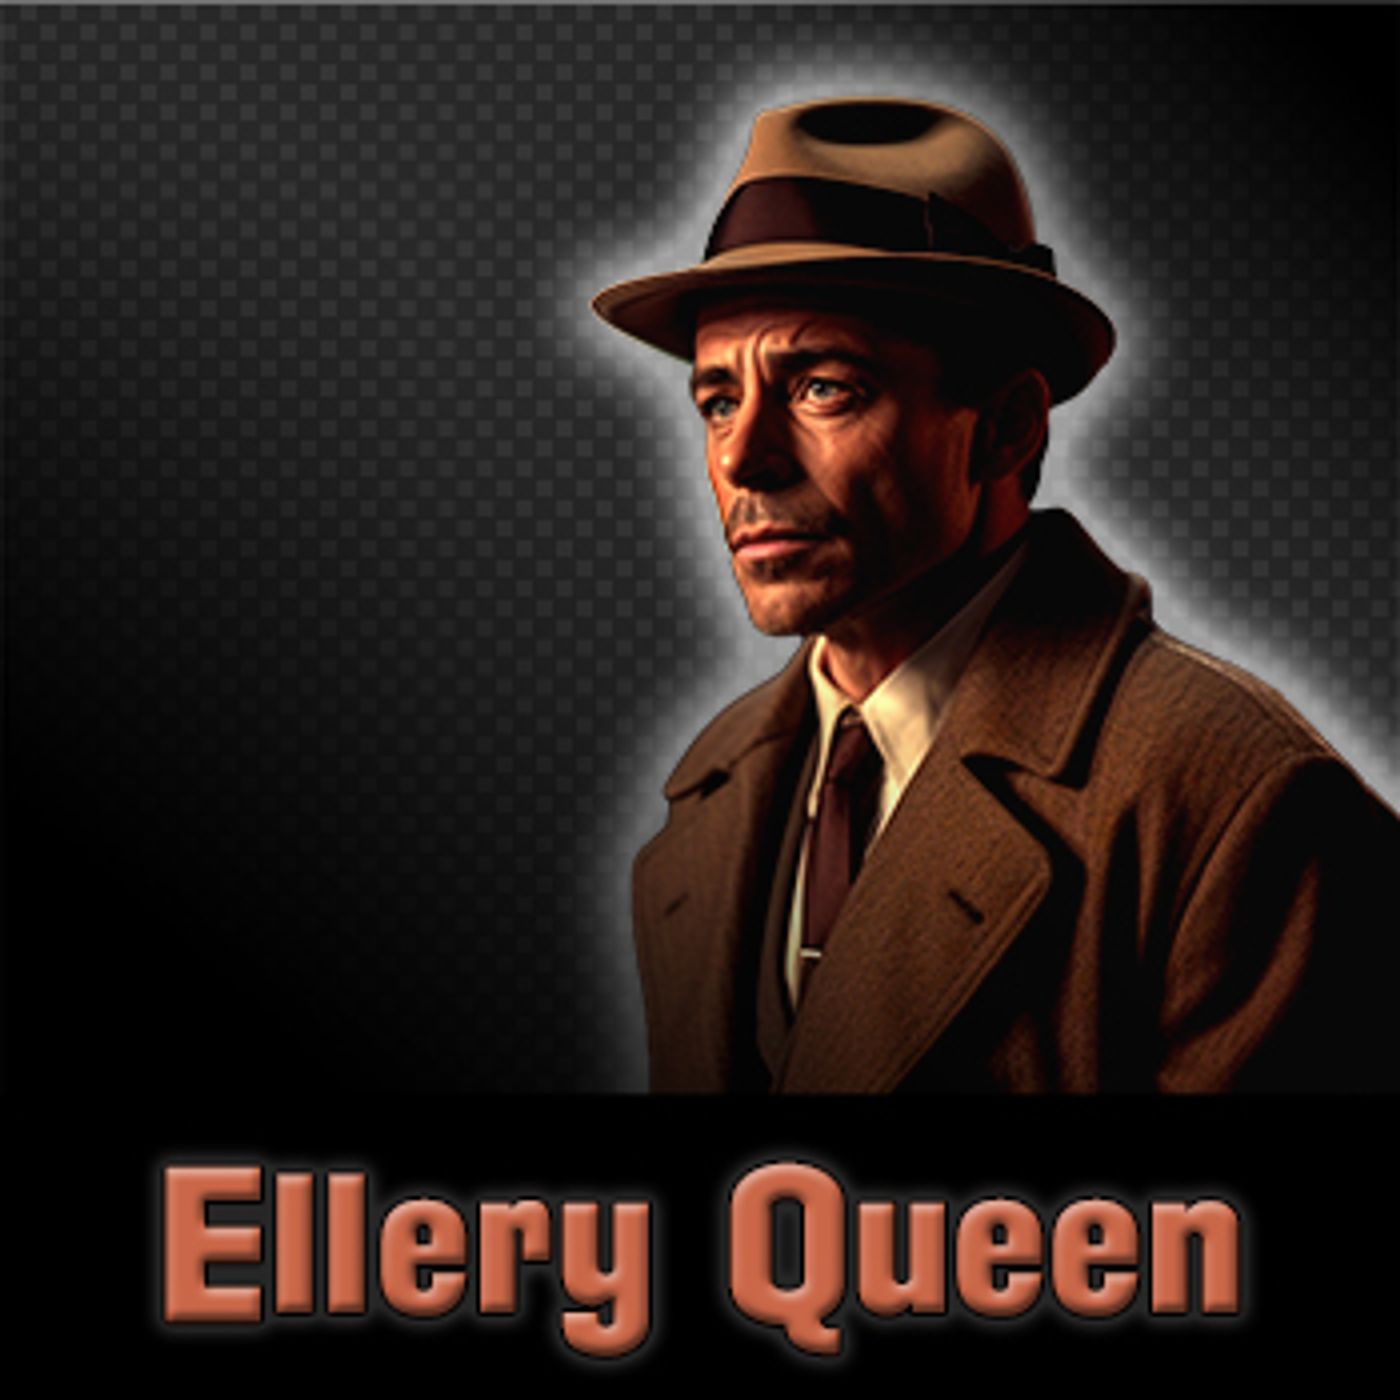 Ellery Queen: The Adventure of the Income Tax Robbery (EP4354)